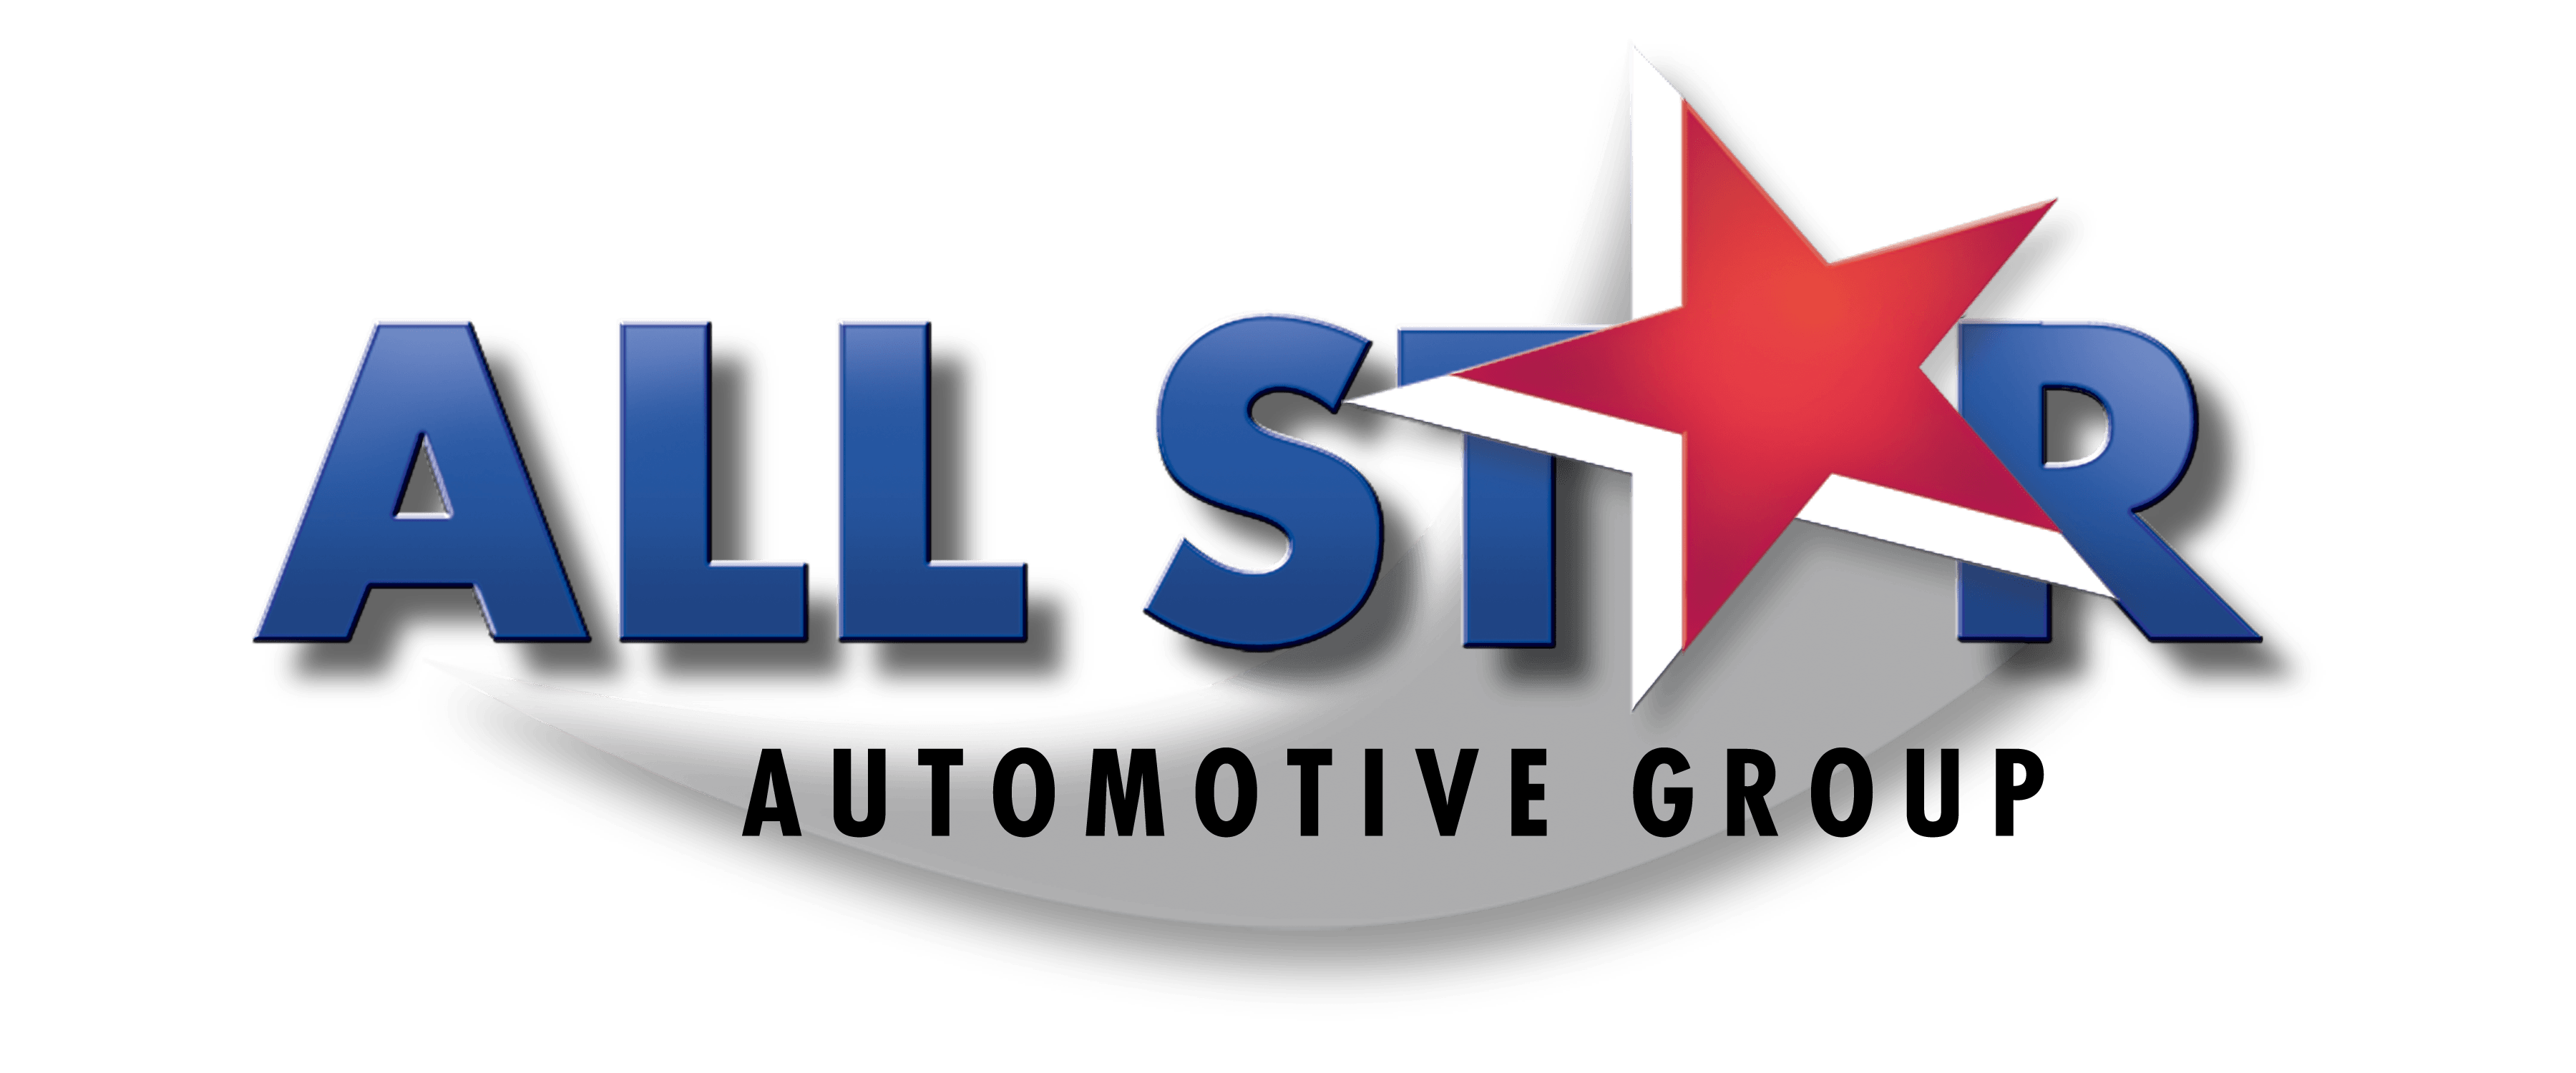 Star Automobile Logo - All Star Chevrolet is a Baton Rouge Chevrolet dealer and a new car ...